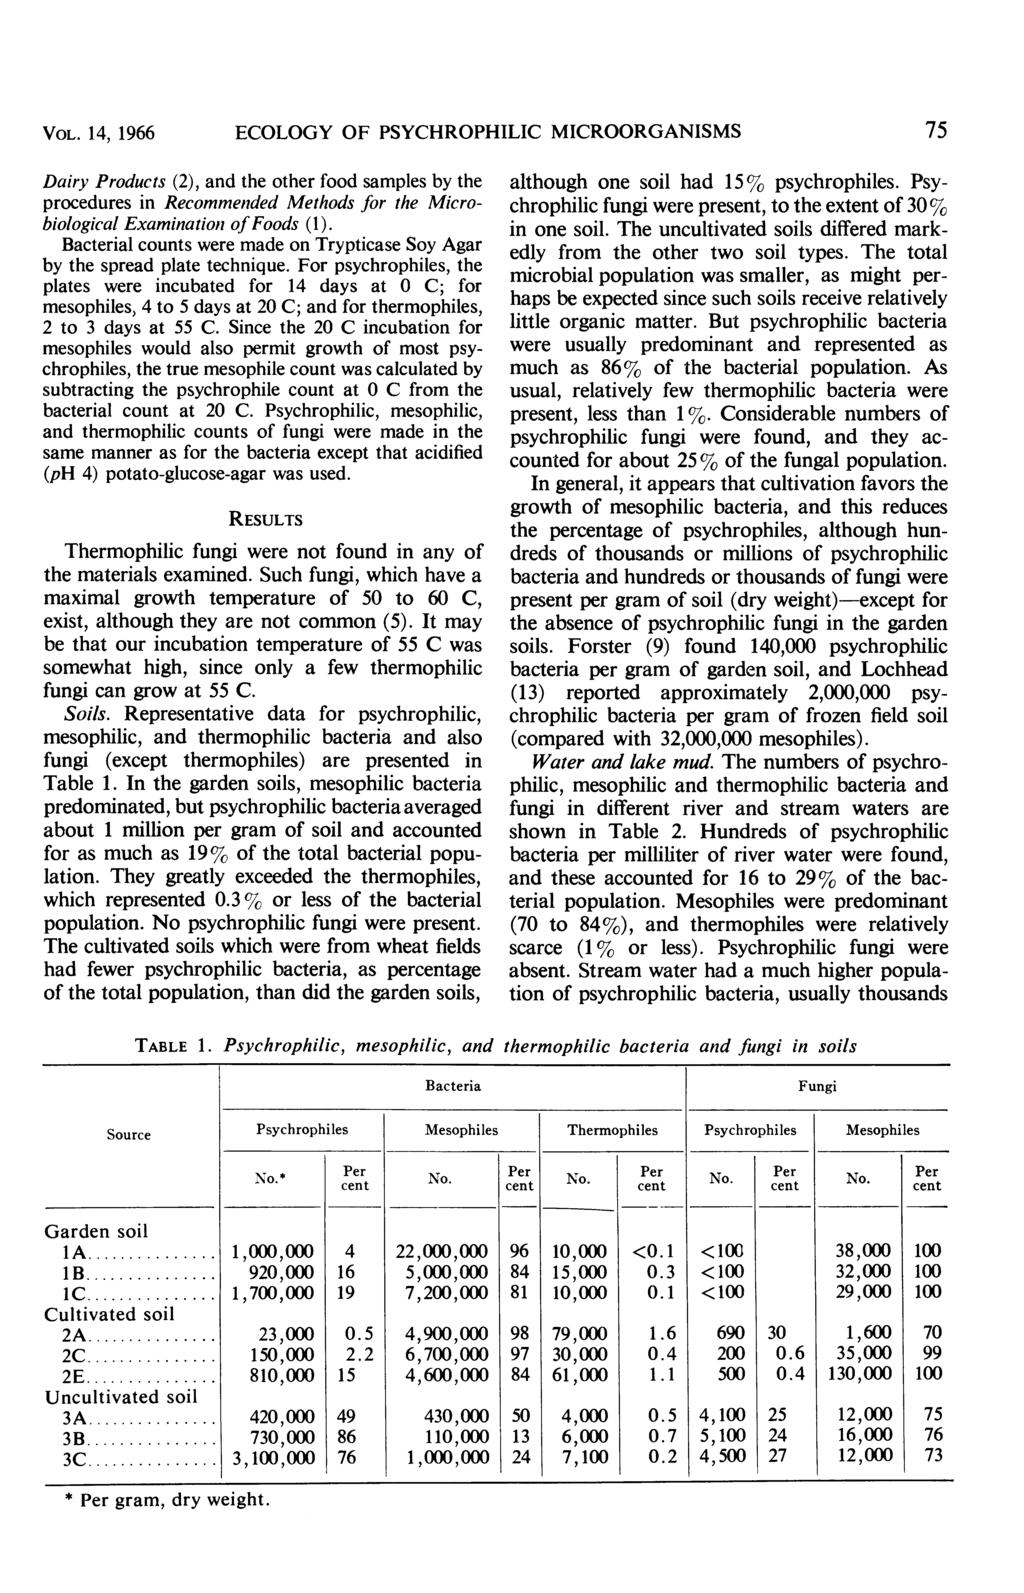 VOL. 14, 1966 ECOLOGY OF PSYCHROPHILIC MICROORGANISMS 75 Dairy Products (2), and the other food samples by the procedures in Recommended Methods for the Microbiological Examinationi offoods (1).